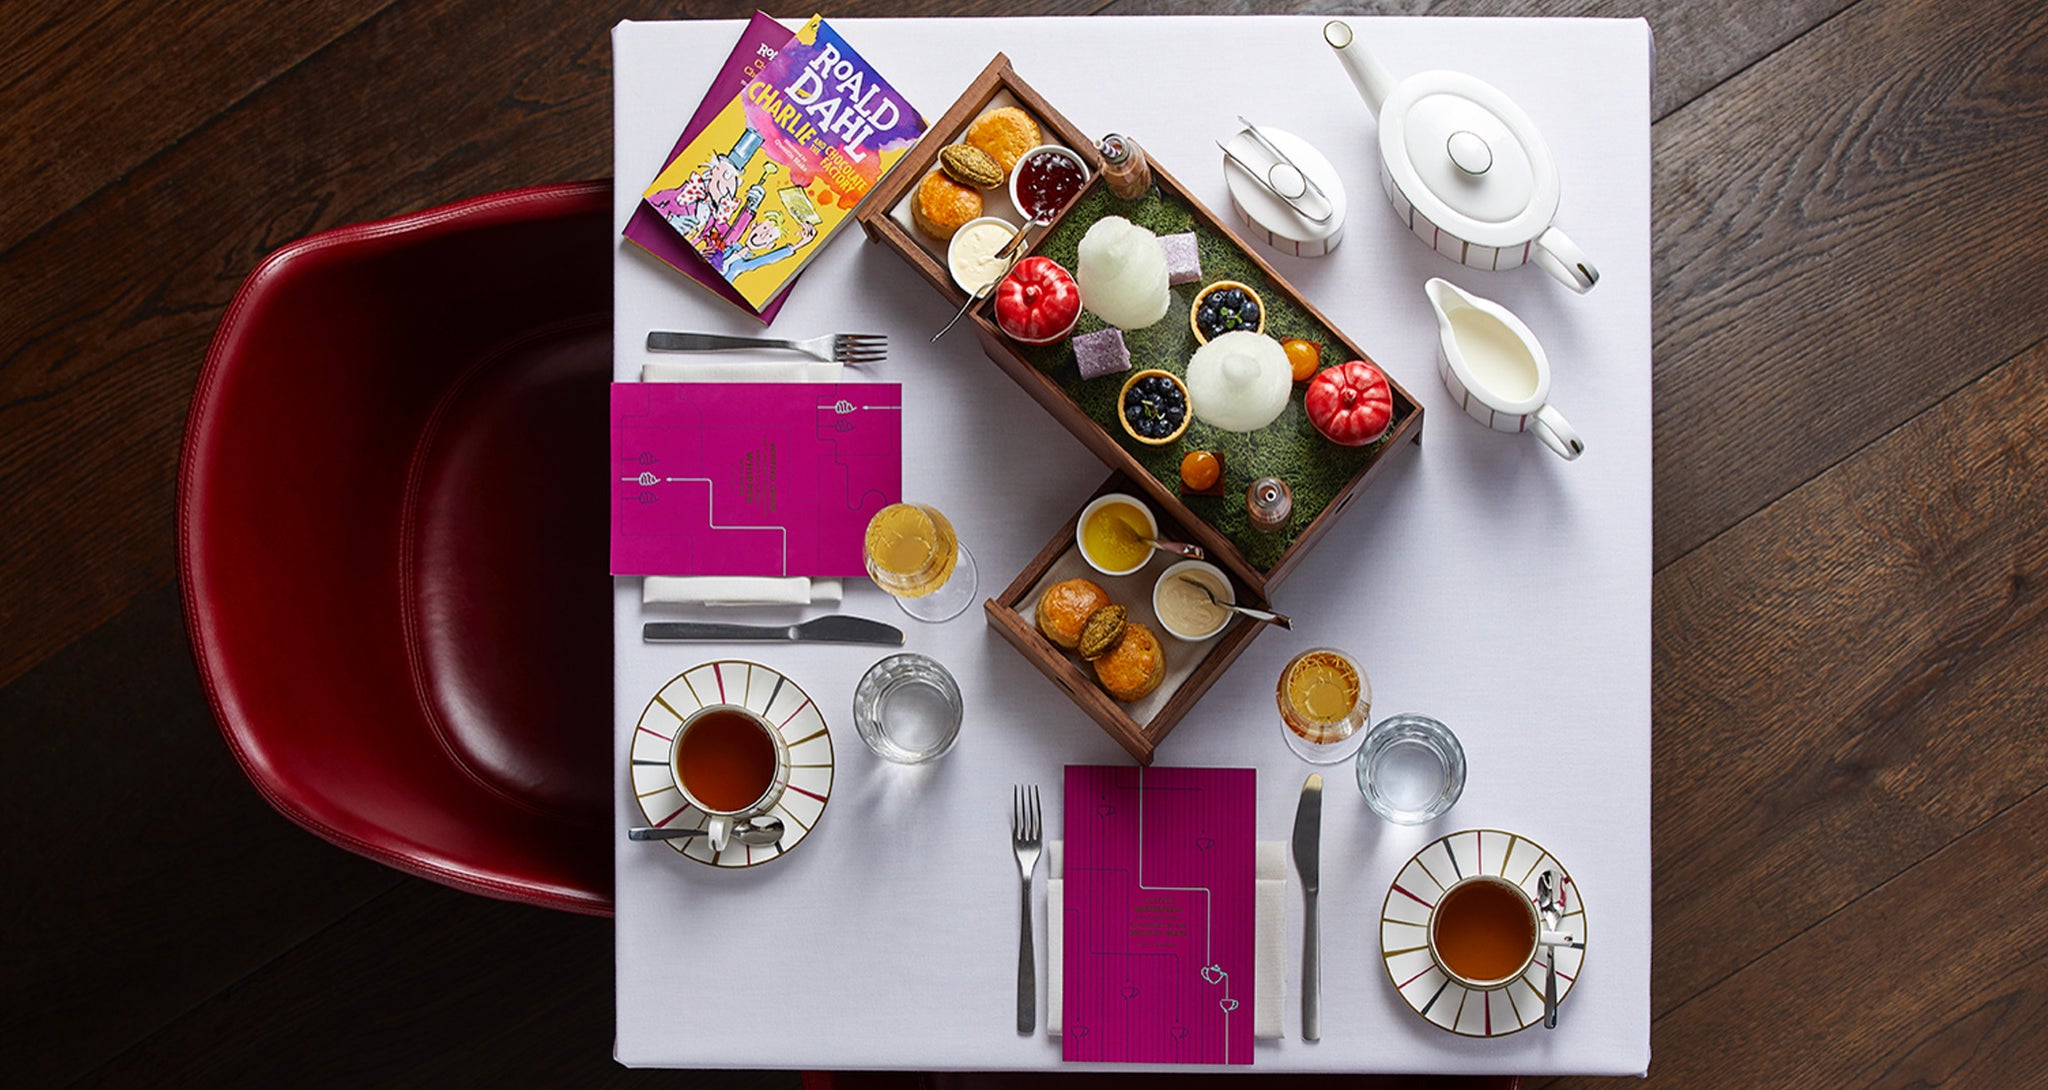 Charlie and the Chocolate Factory Afternoon Tea at One Aldwych